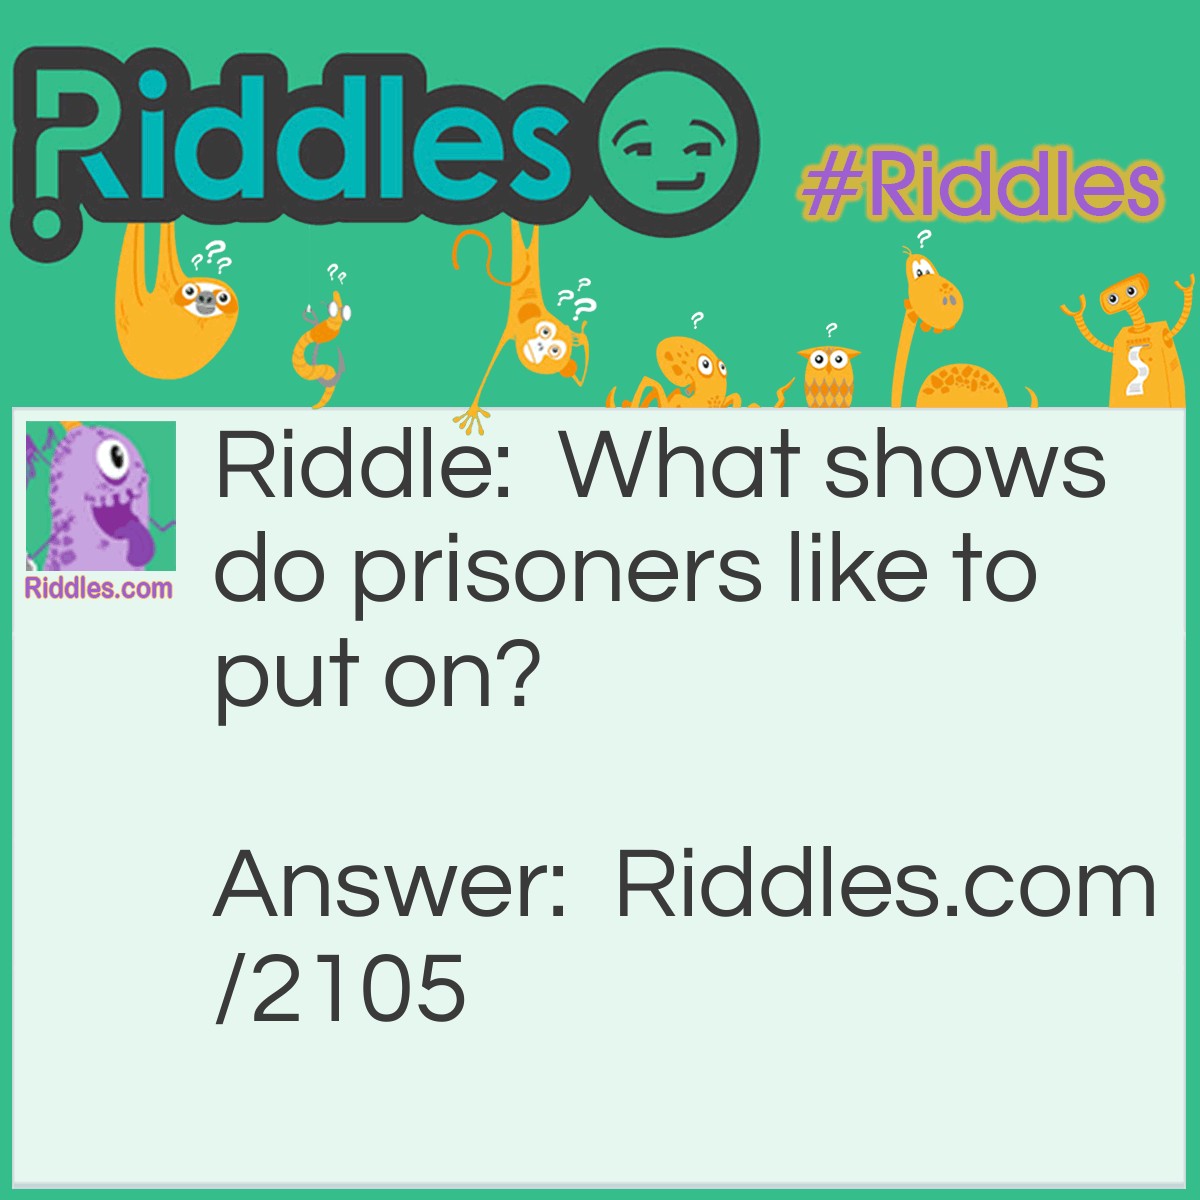 Riddle: What shows do prisoners like to put on? Answer: A cell-out (sell out).